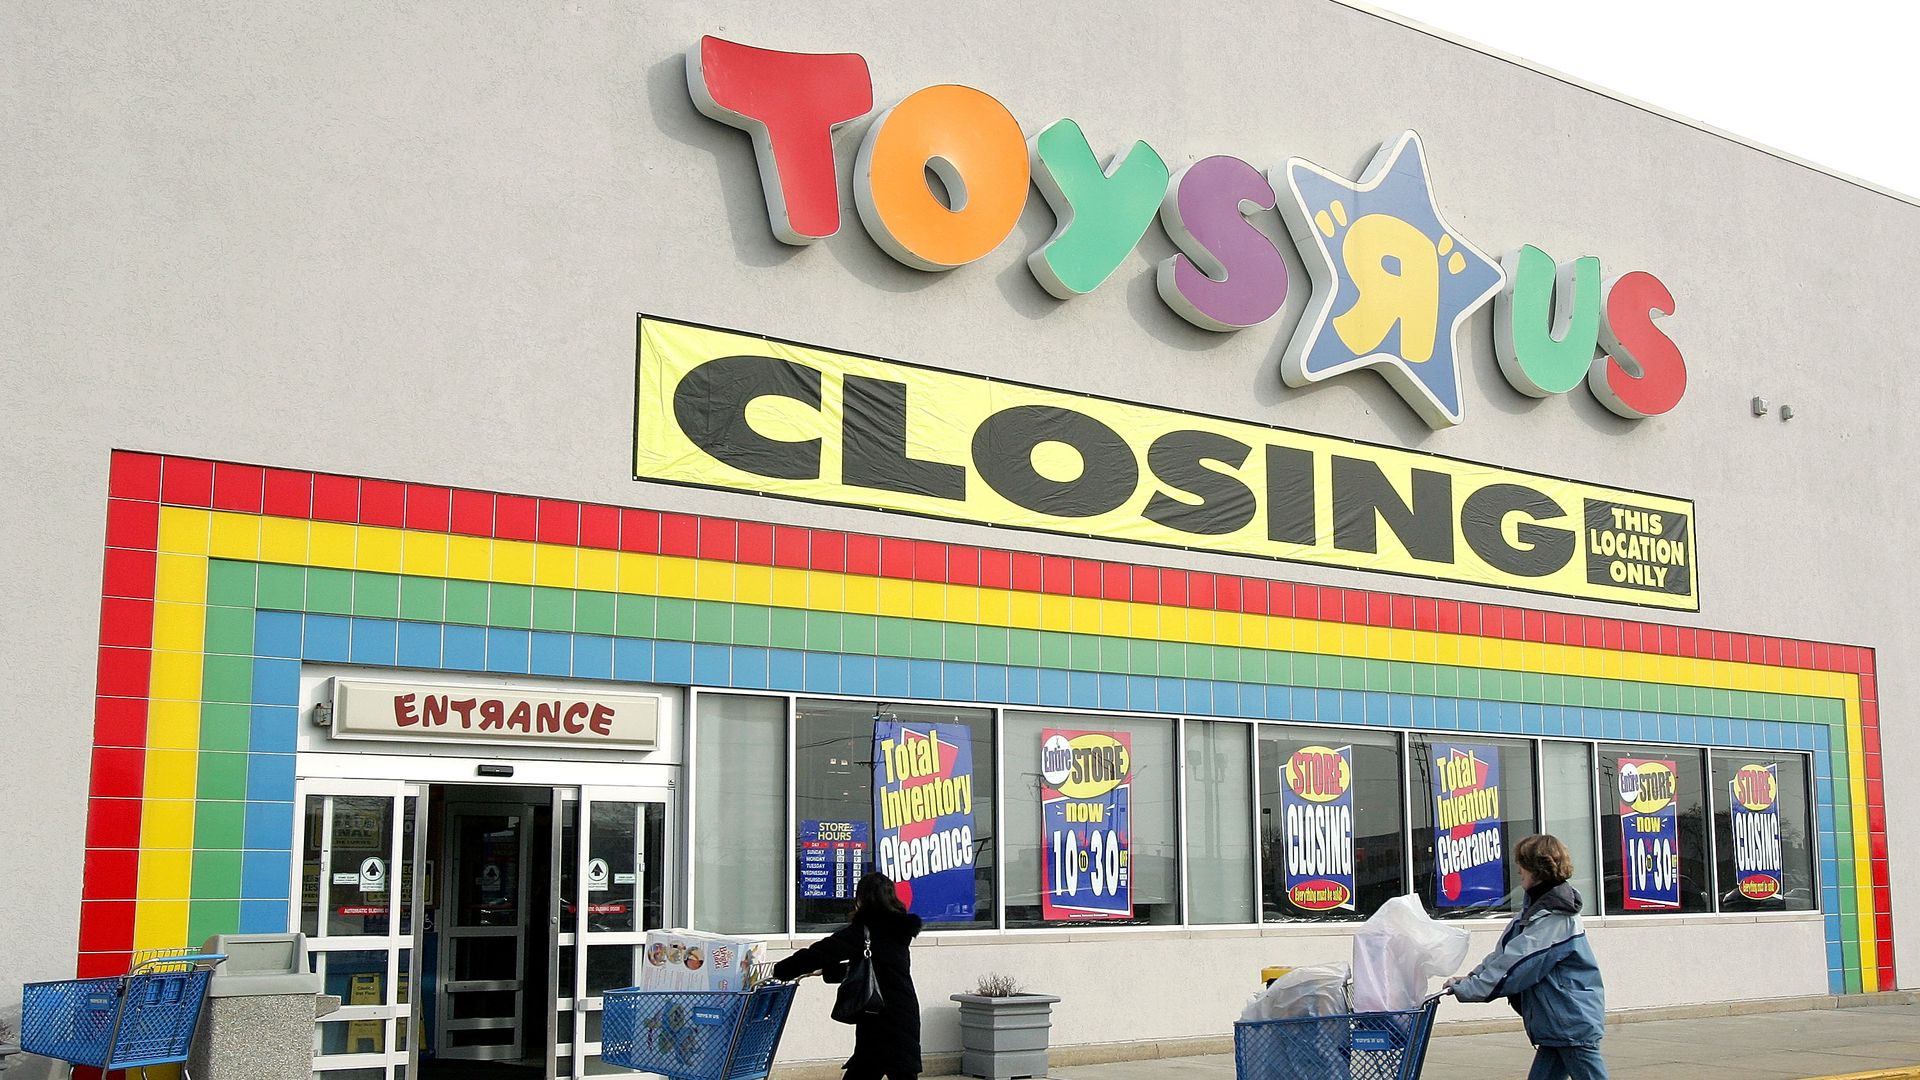 Toys "R" Us store that is closing.